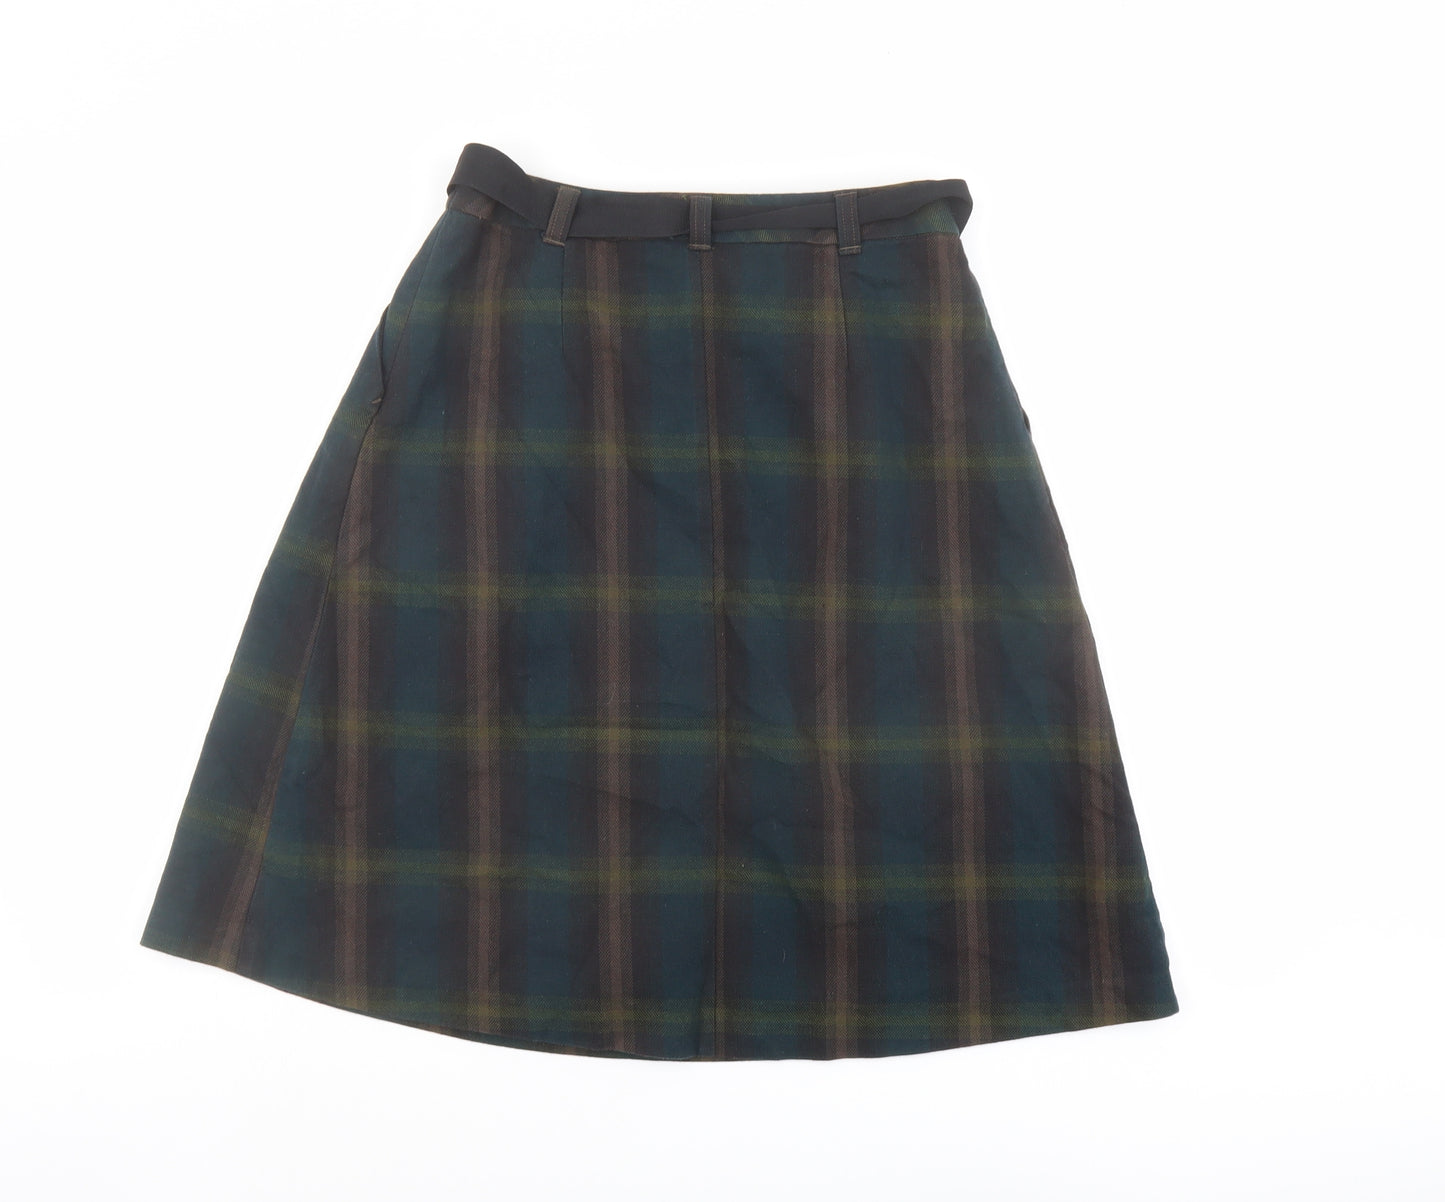 Laura Ashley Womens Green Plaid Cotton A-Line Skirt Size 8 Zip - Belt included